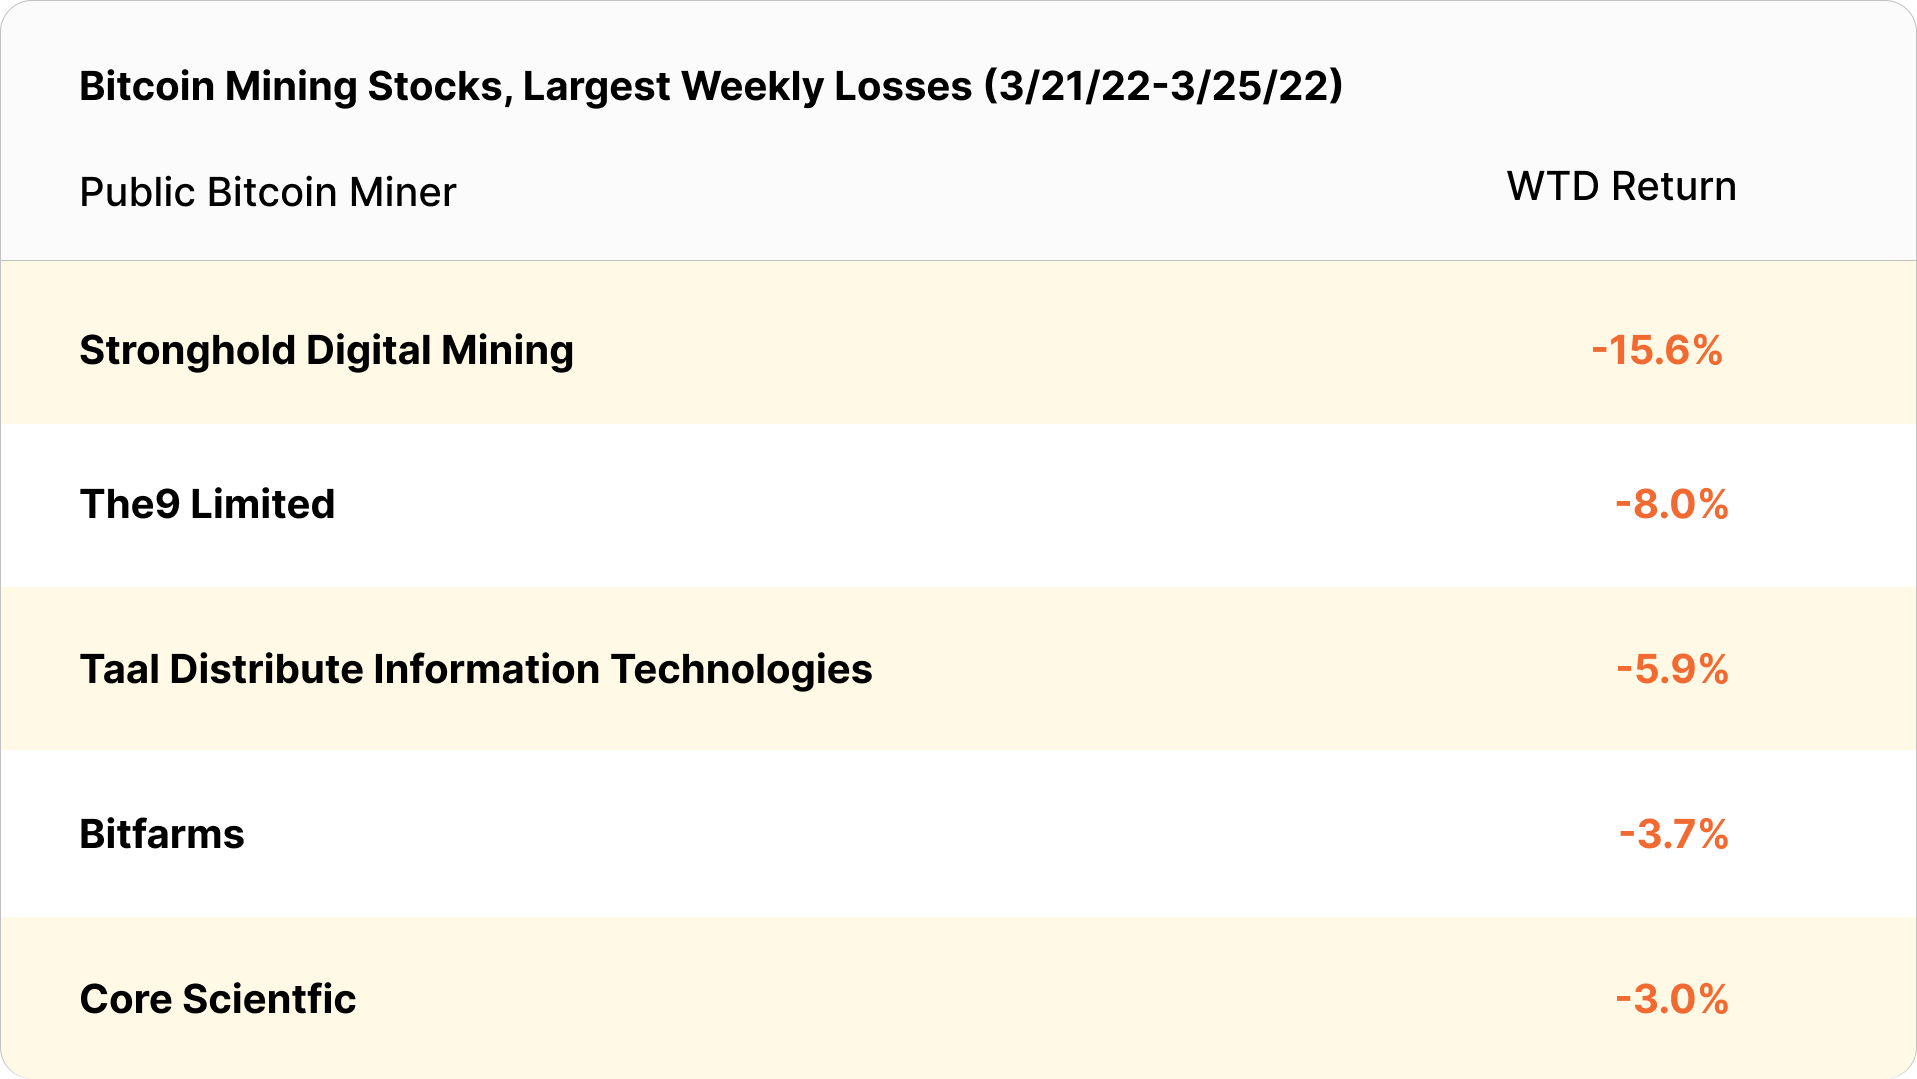 bitcoin mining stocks weekly losses (March 21 - March 25, 2022)